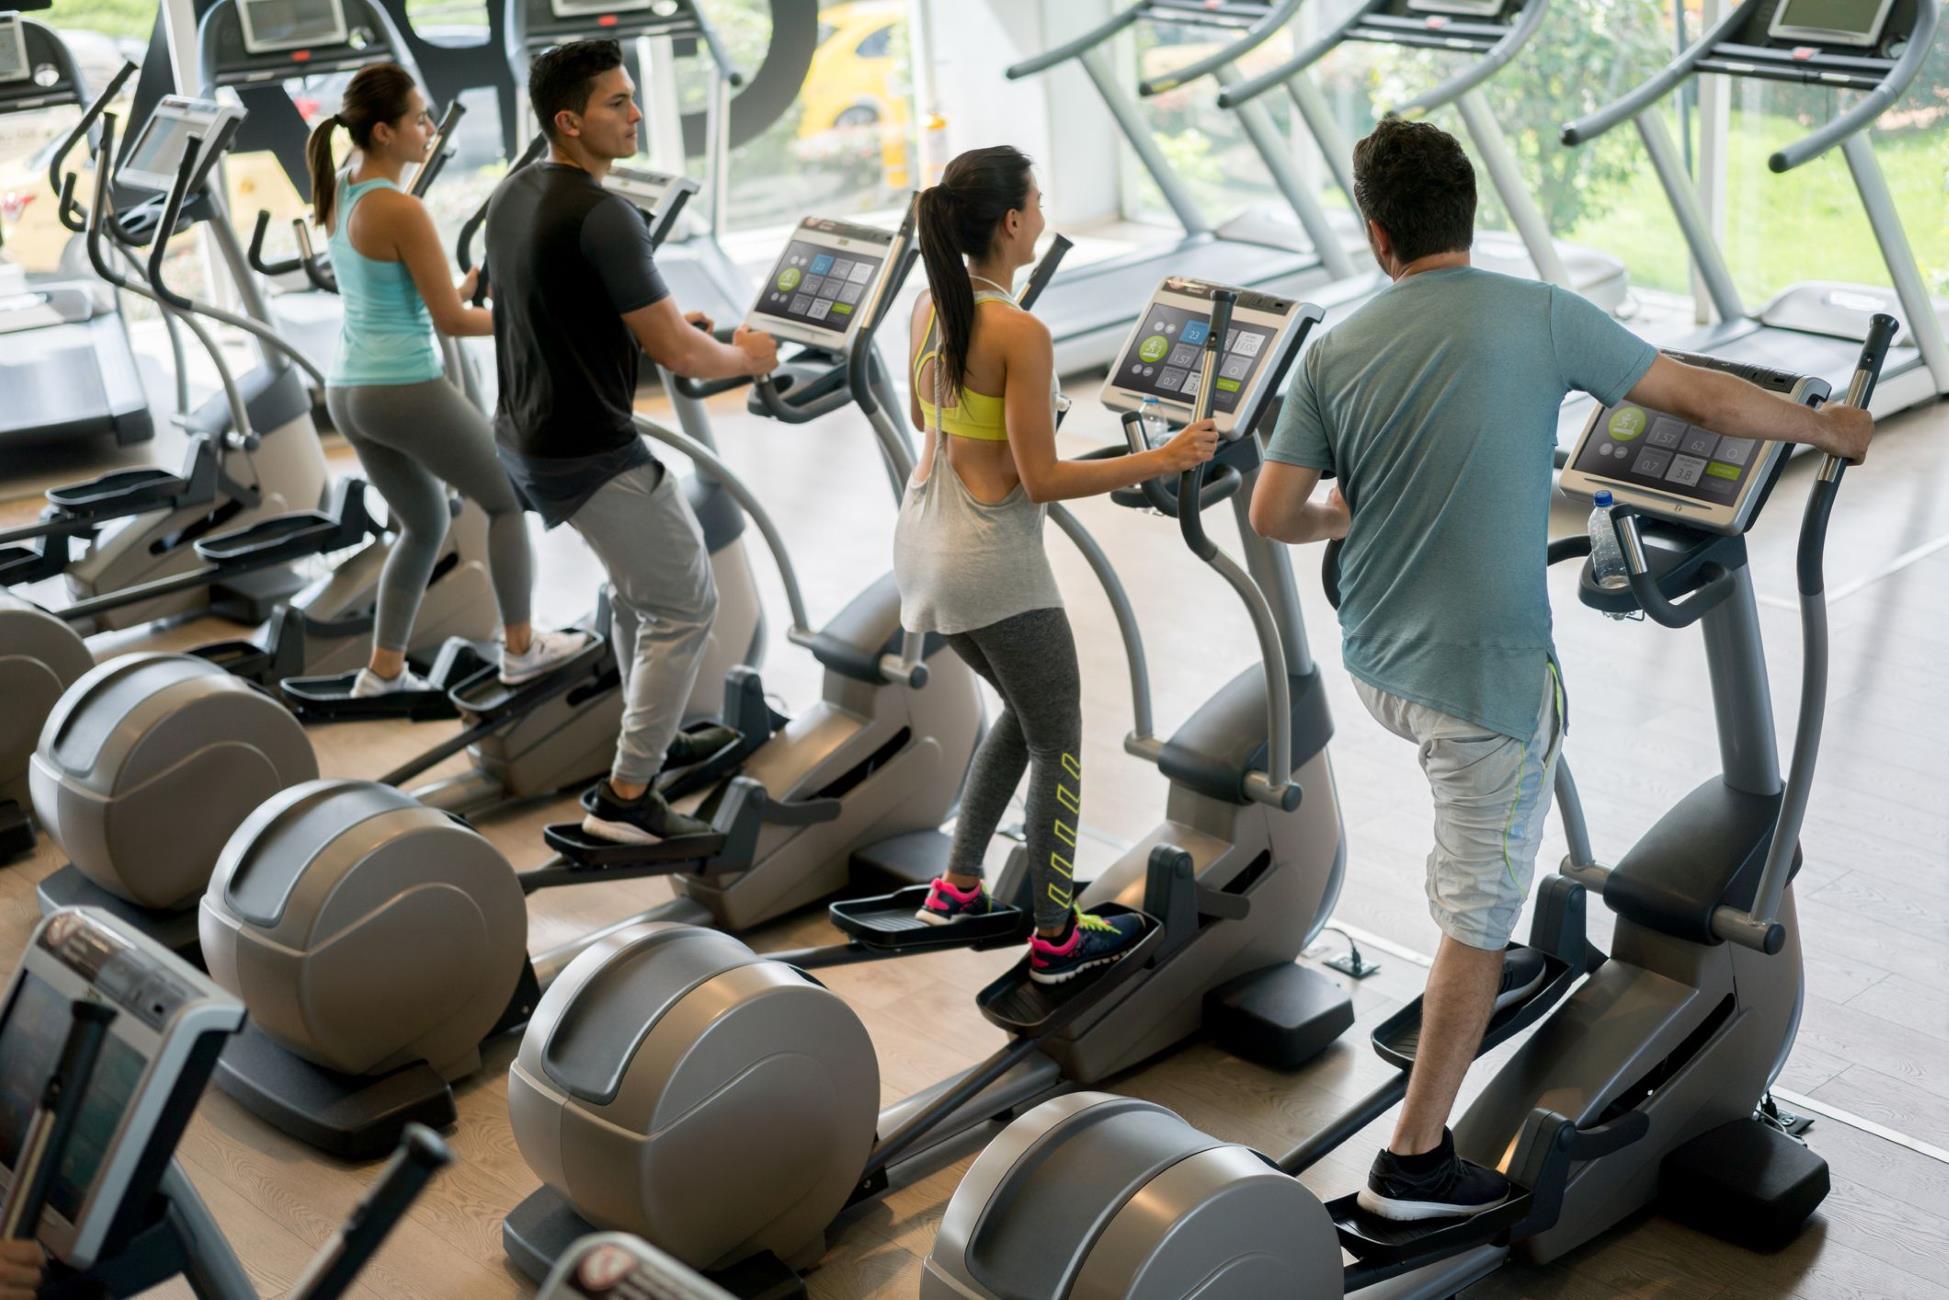 The Benefits And Techniques Of Incorporating Ellipticals Into A Runner’s Routine